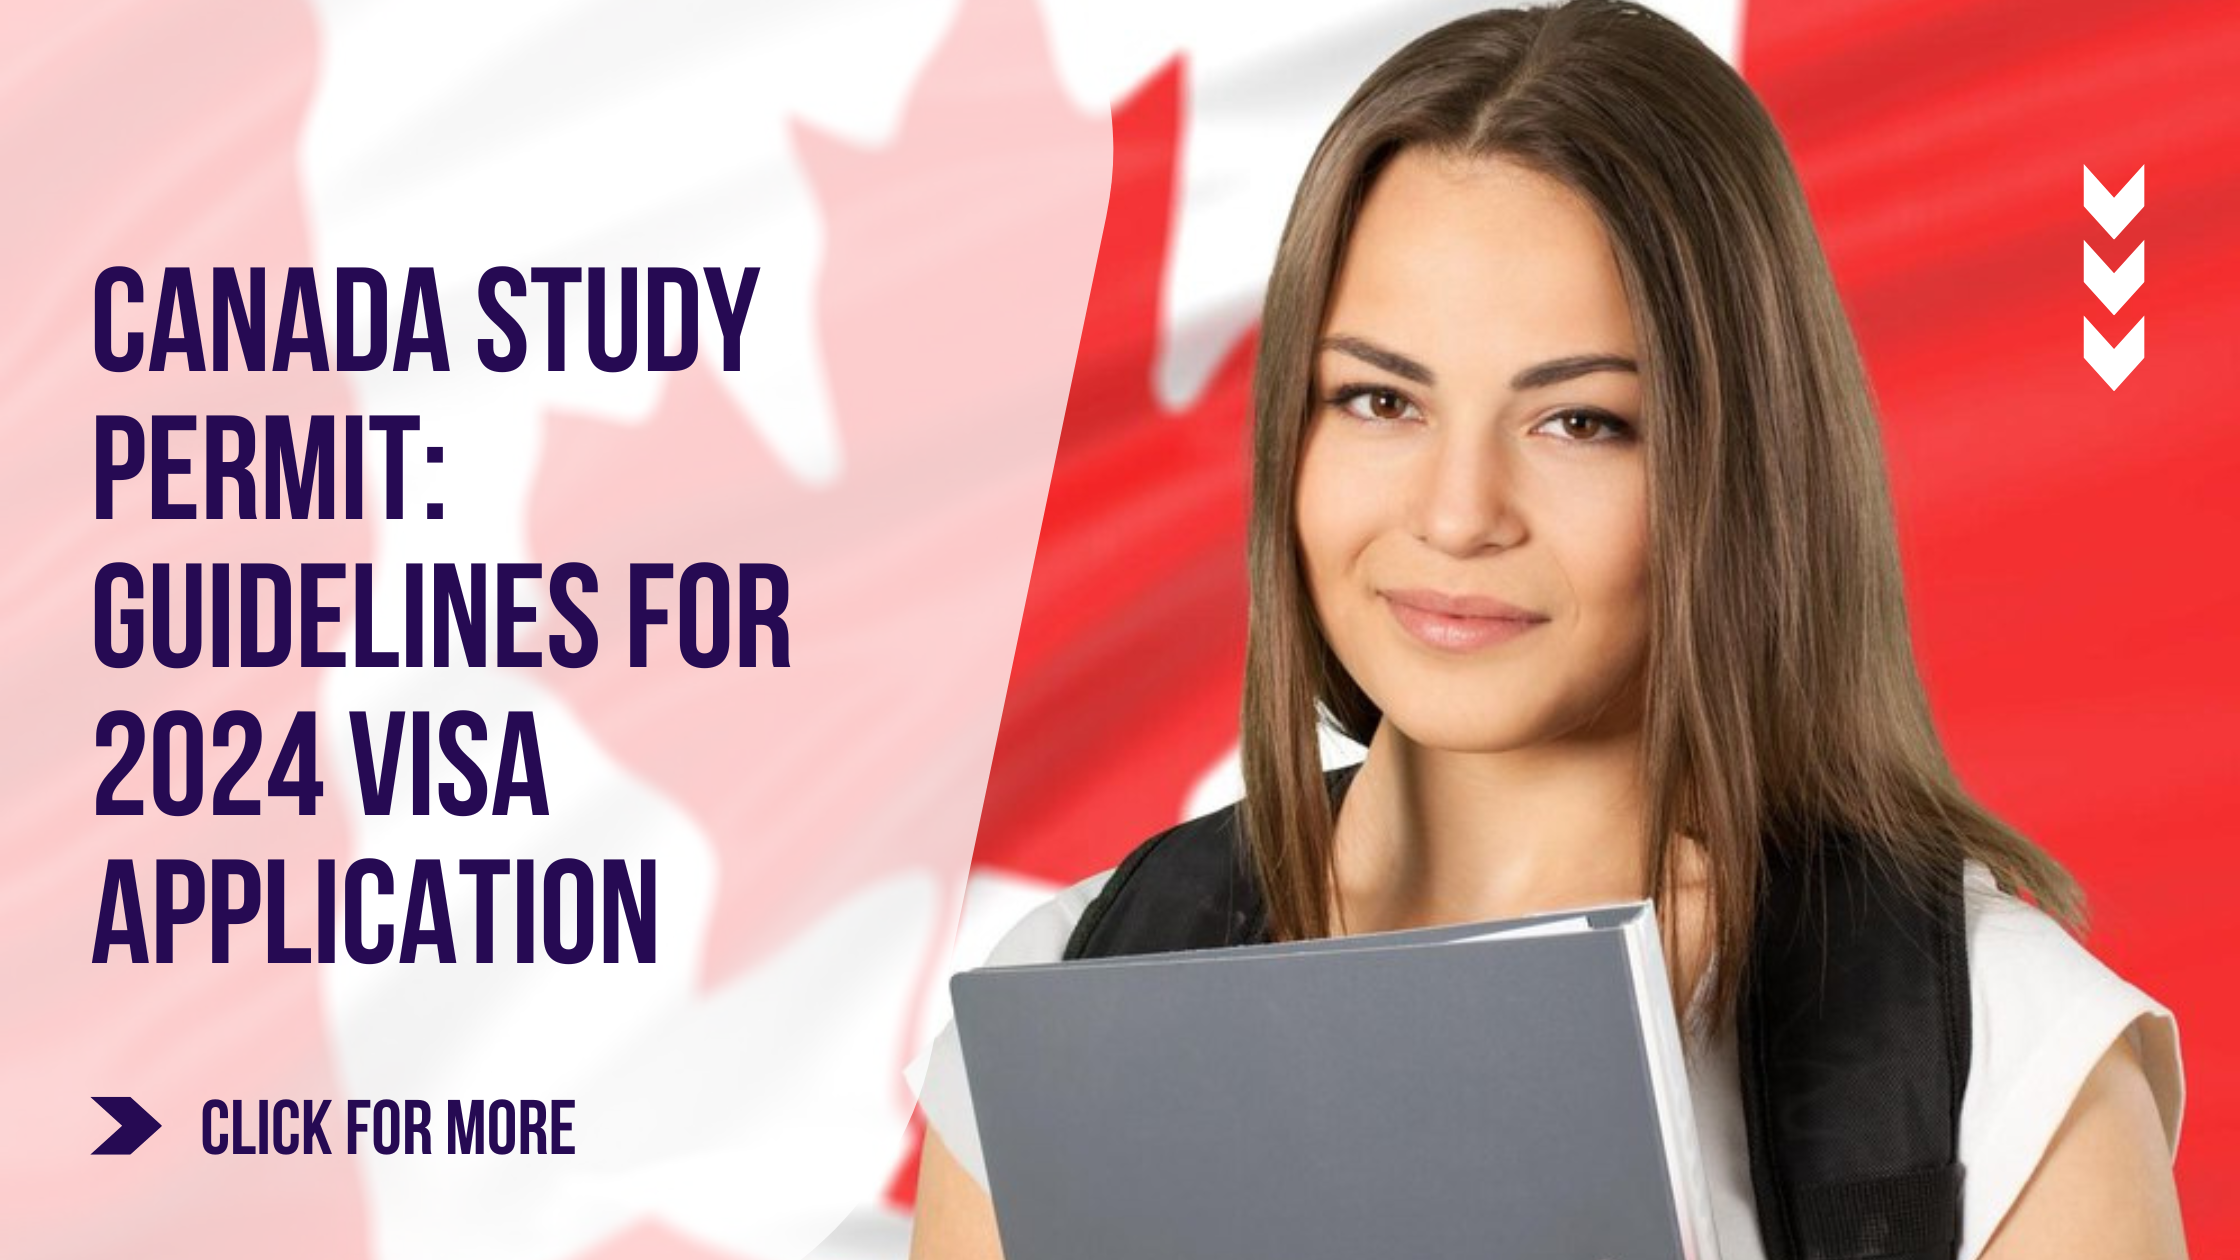 Canada Study Permit Guidelines For 2024 Visa Application